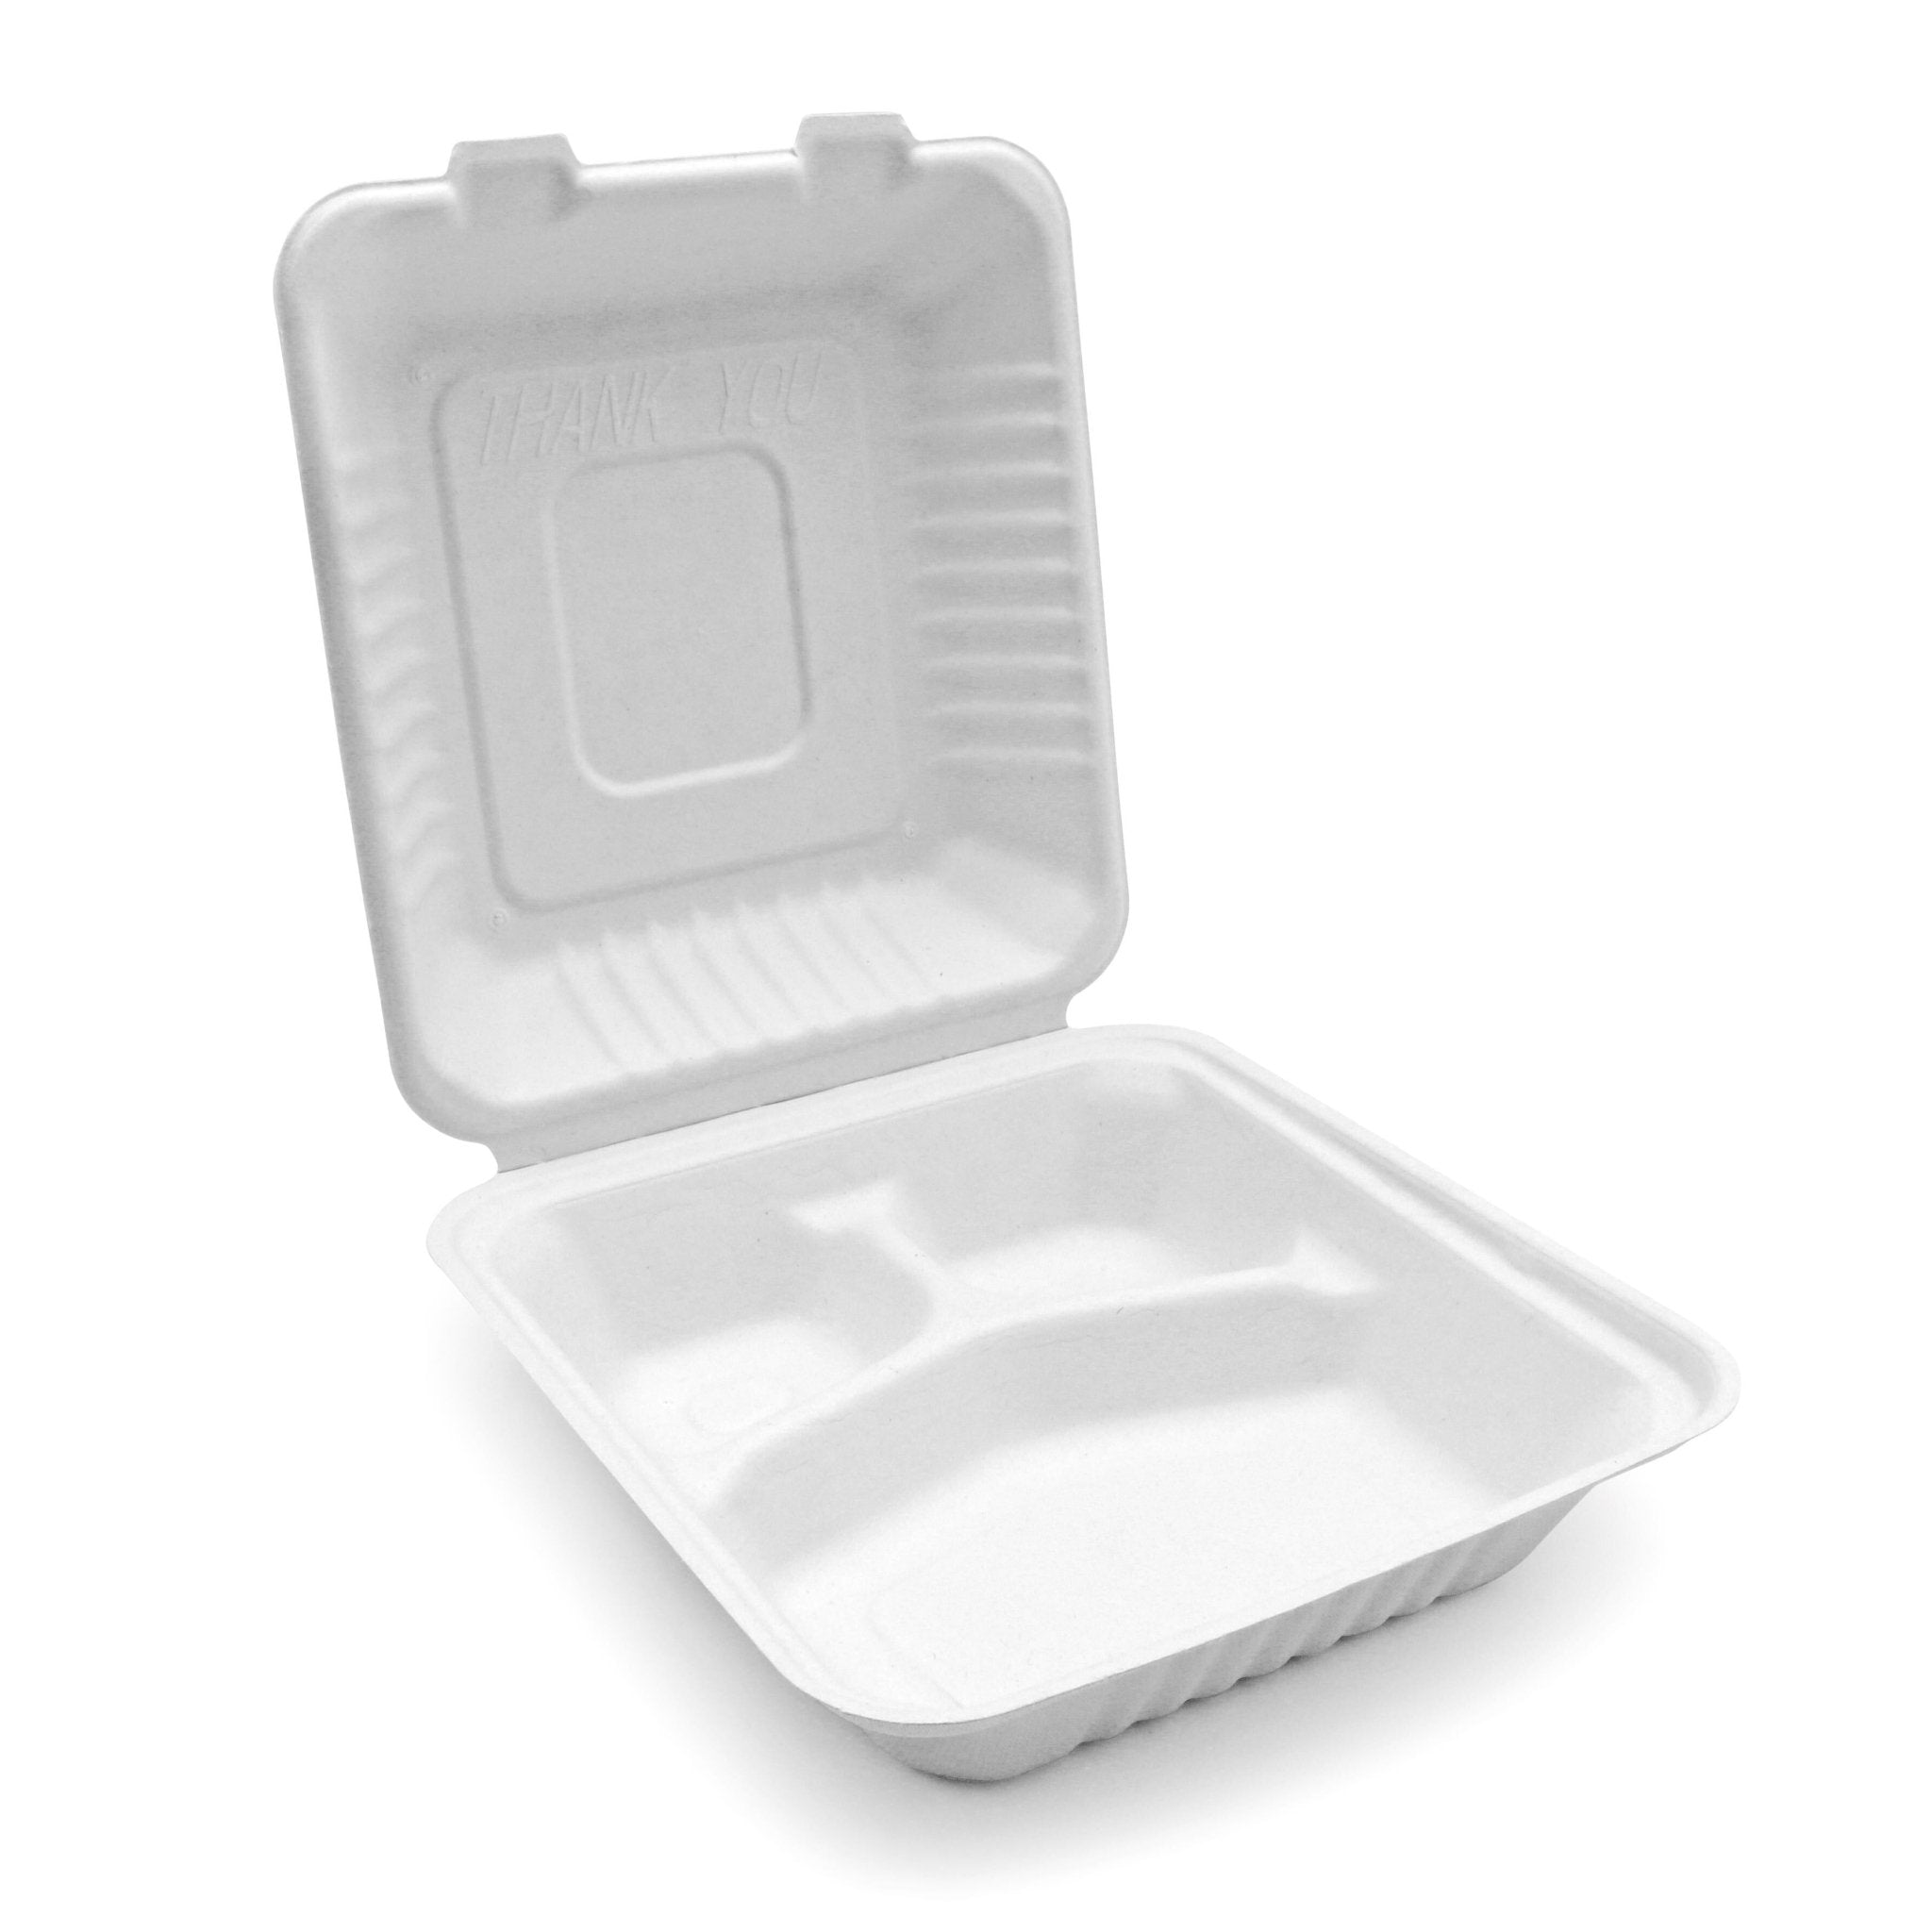 Bagasse Hinged Container 3-compartment, PFAS FREE, White, 9" x 9", 200pc - Feast Source